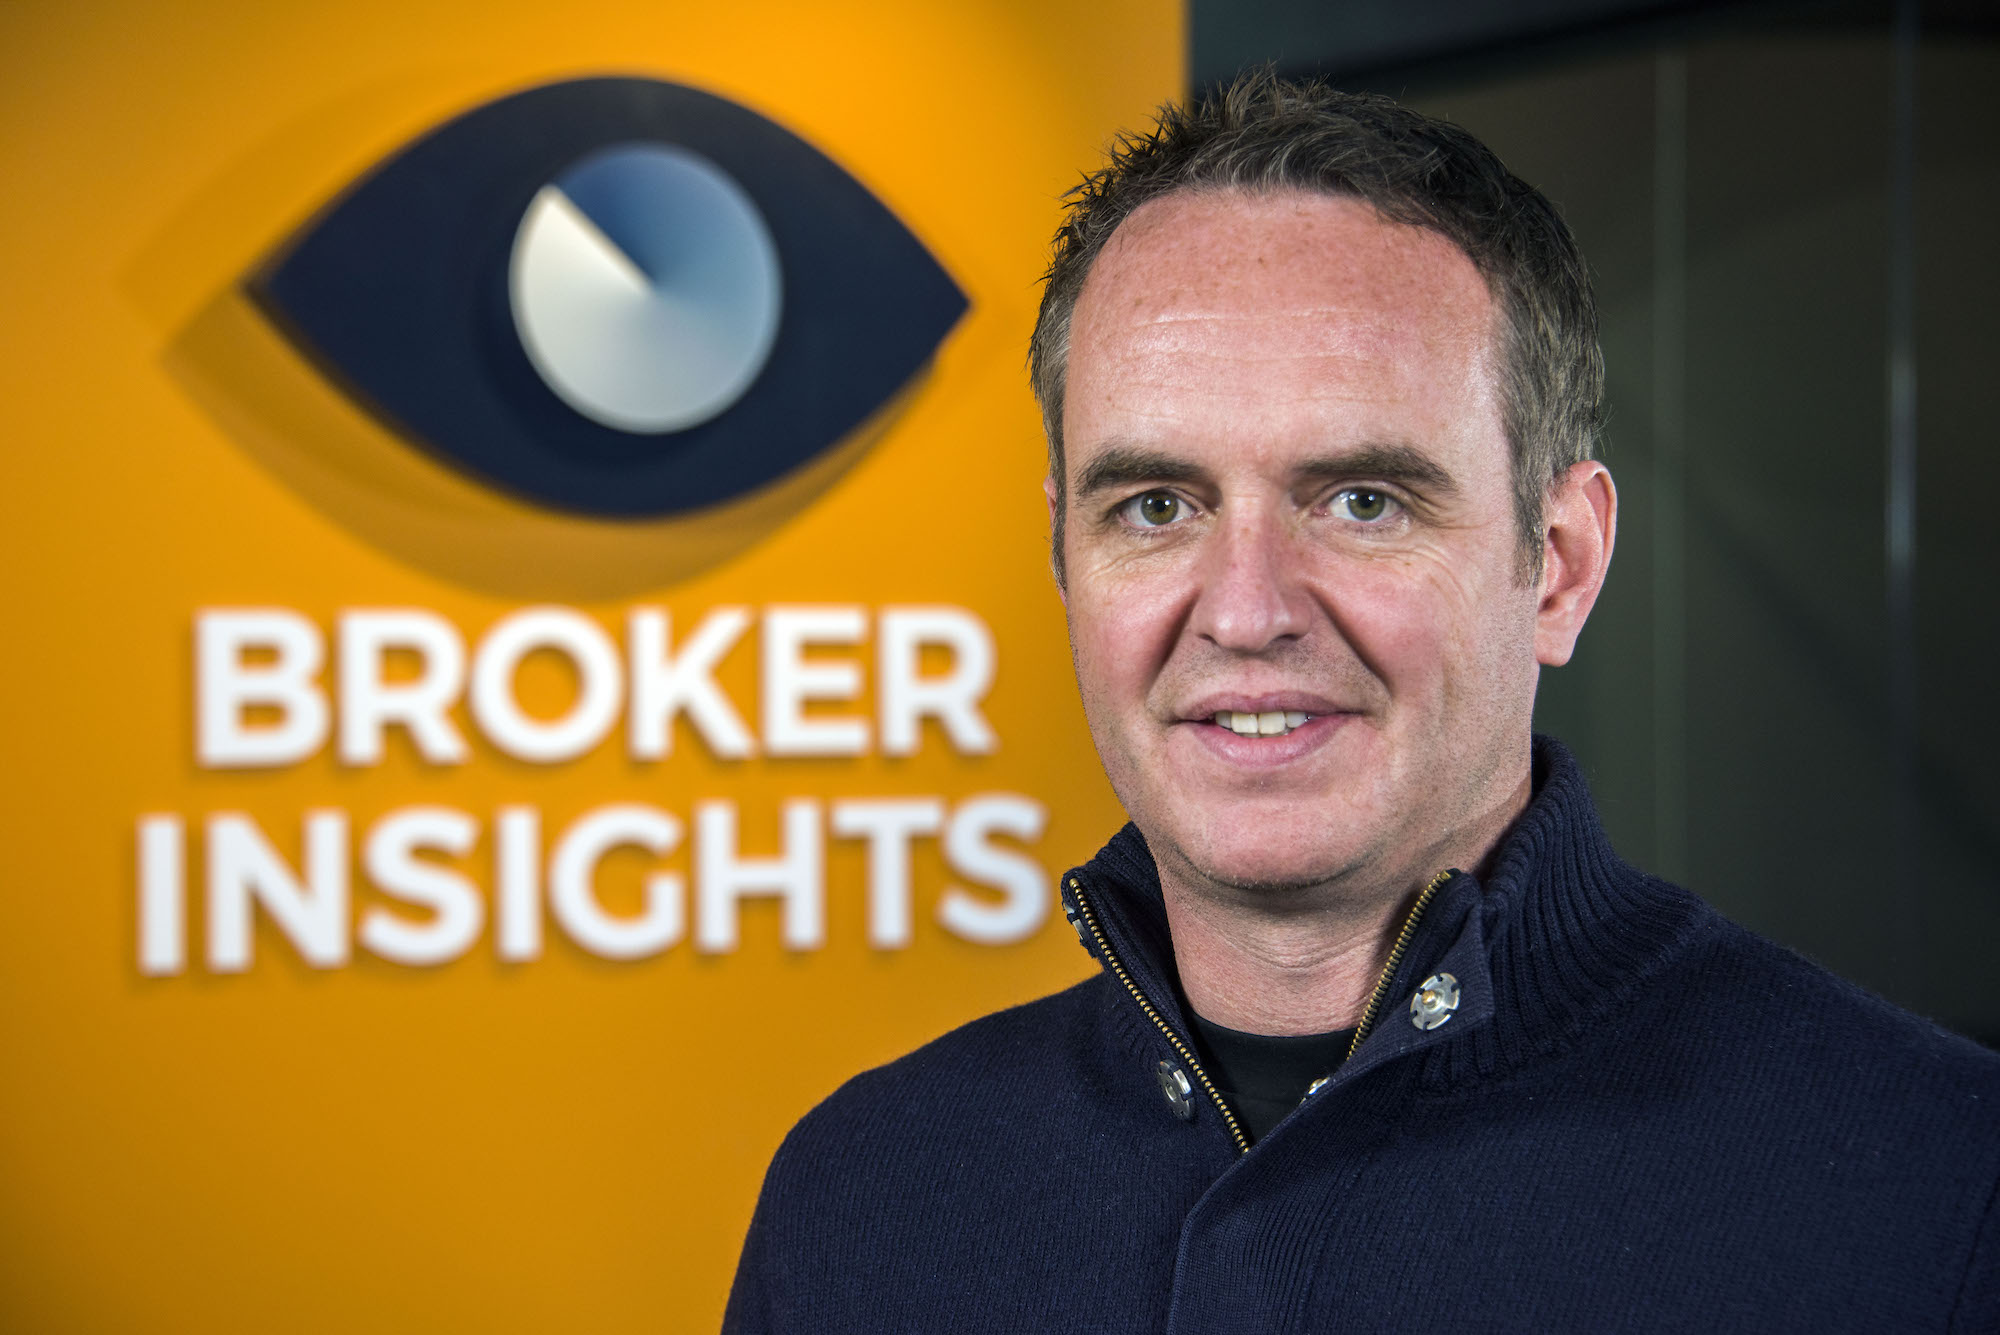 New non-executive director joins Broker Insights board